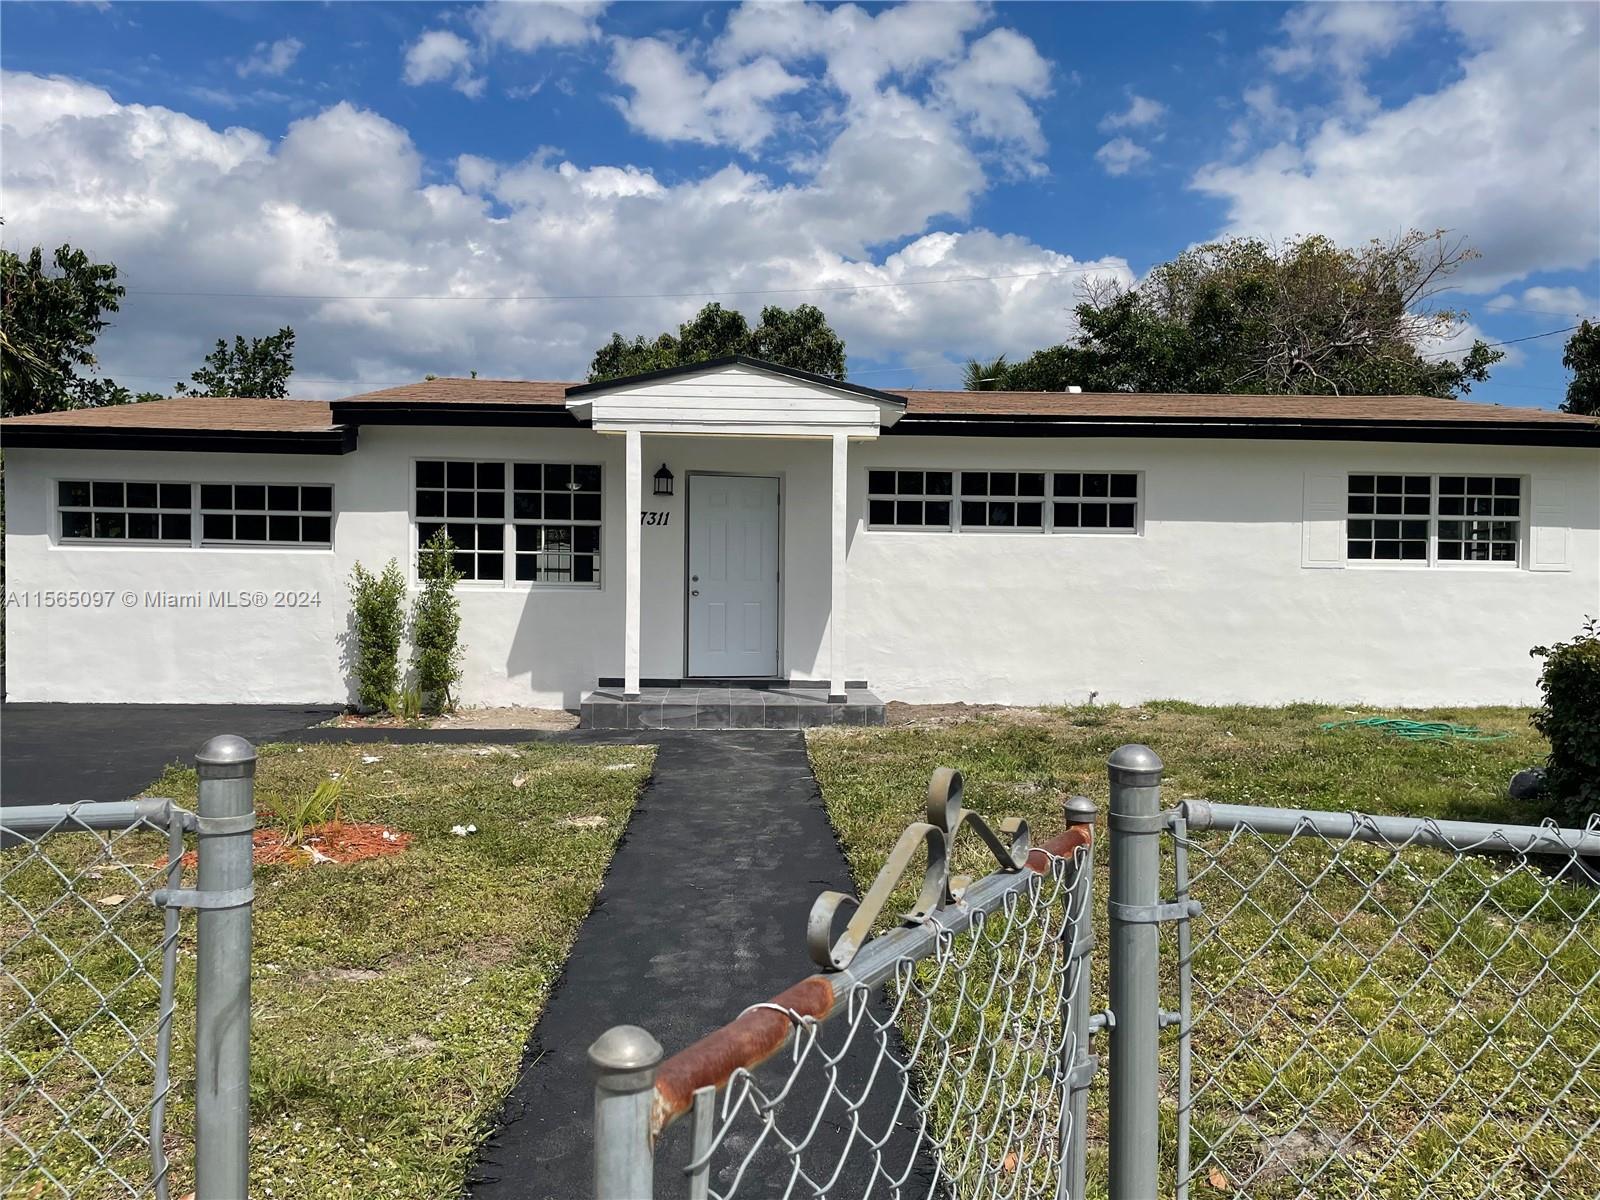 Photo of 17311 NW 32nd Ct in Miami Gardens, FL